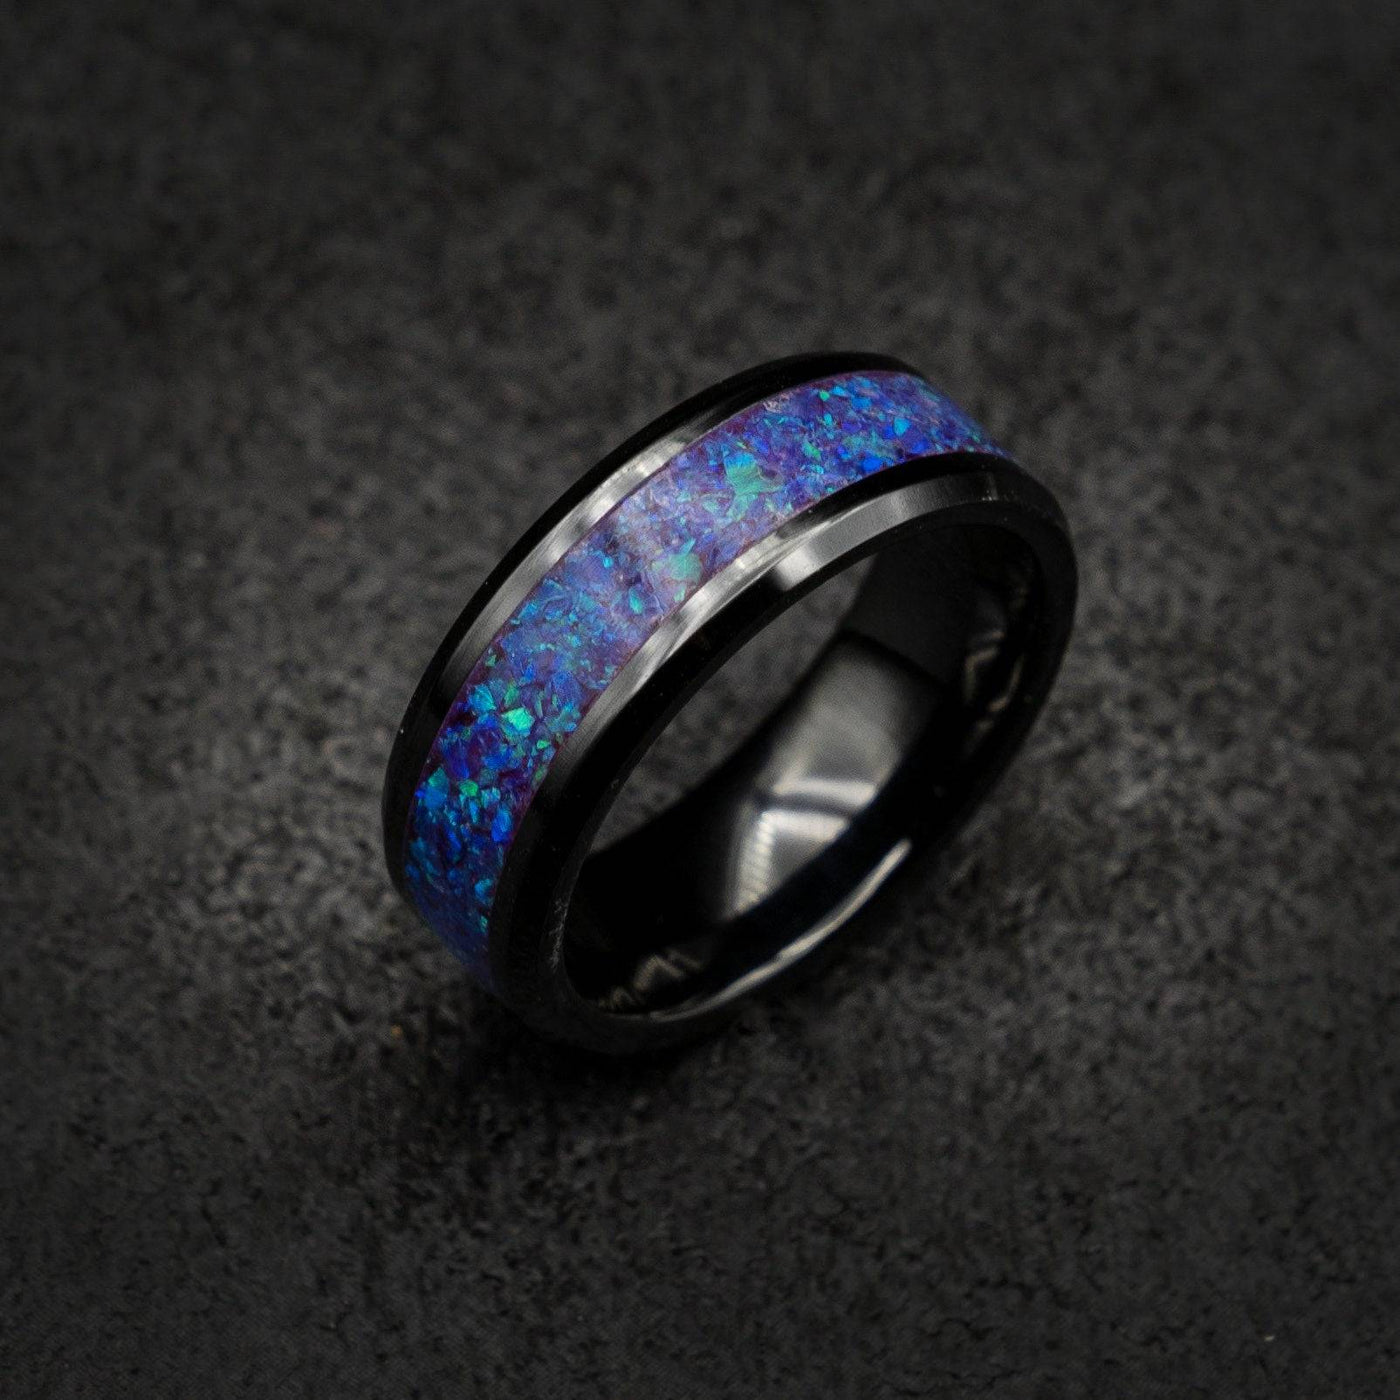 Black Ceramic With Purple Blue Opal Glow in the Dark Ring Unique Wedding Band